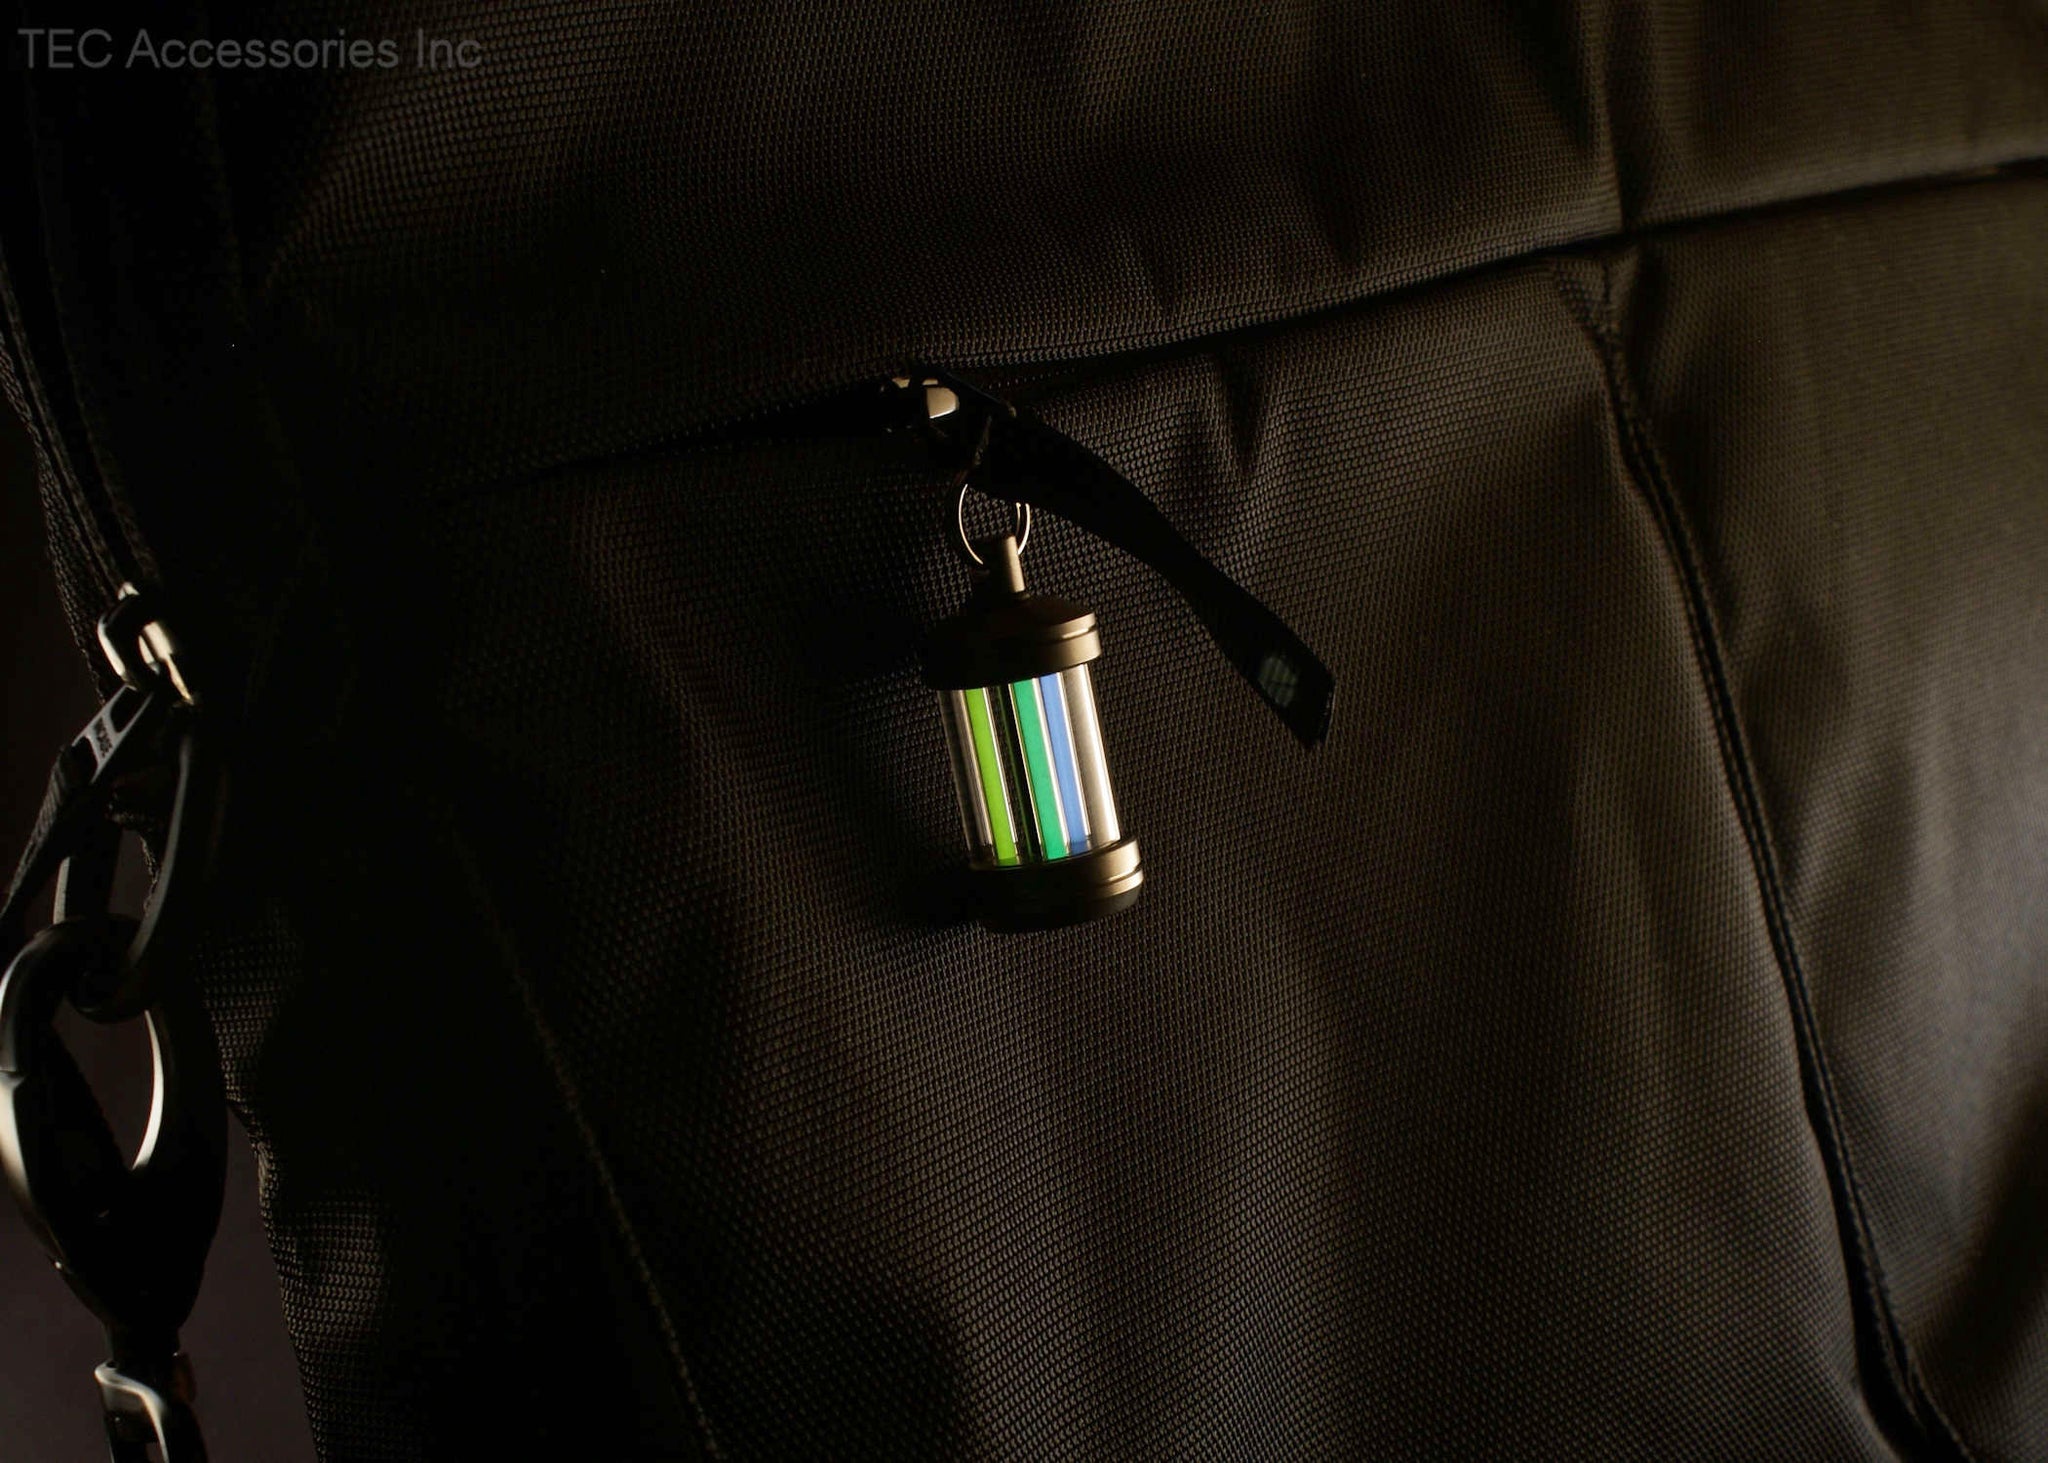 Isotope Reactor Tritium Fob on bag